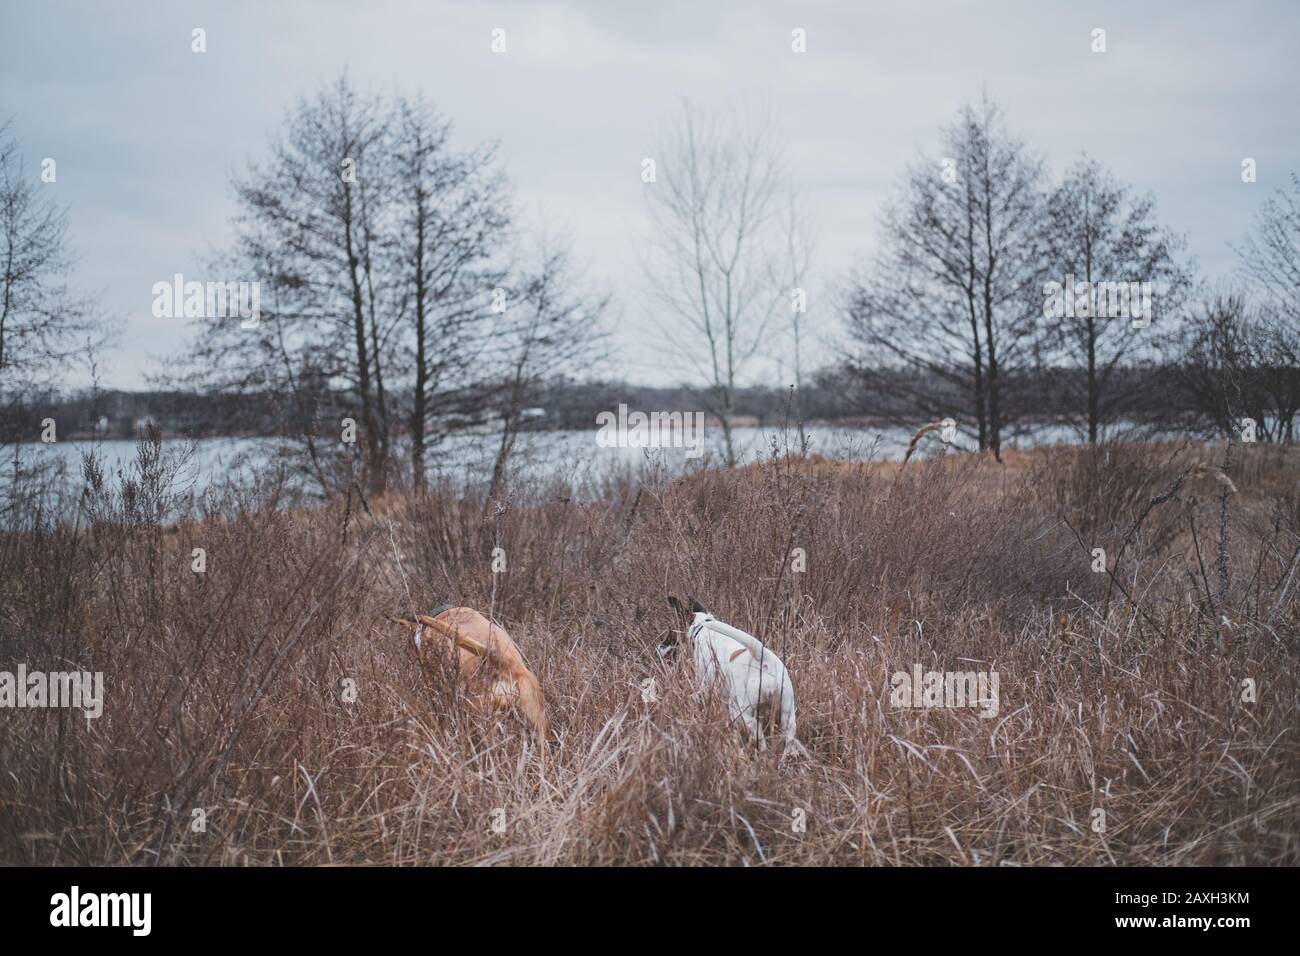 Two dogs search something in the field grasses. Adventure dogs, letting pets freedom outdoors Stock Photo